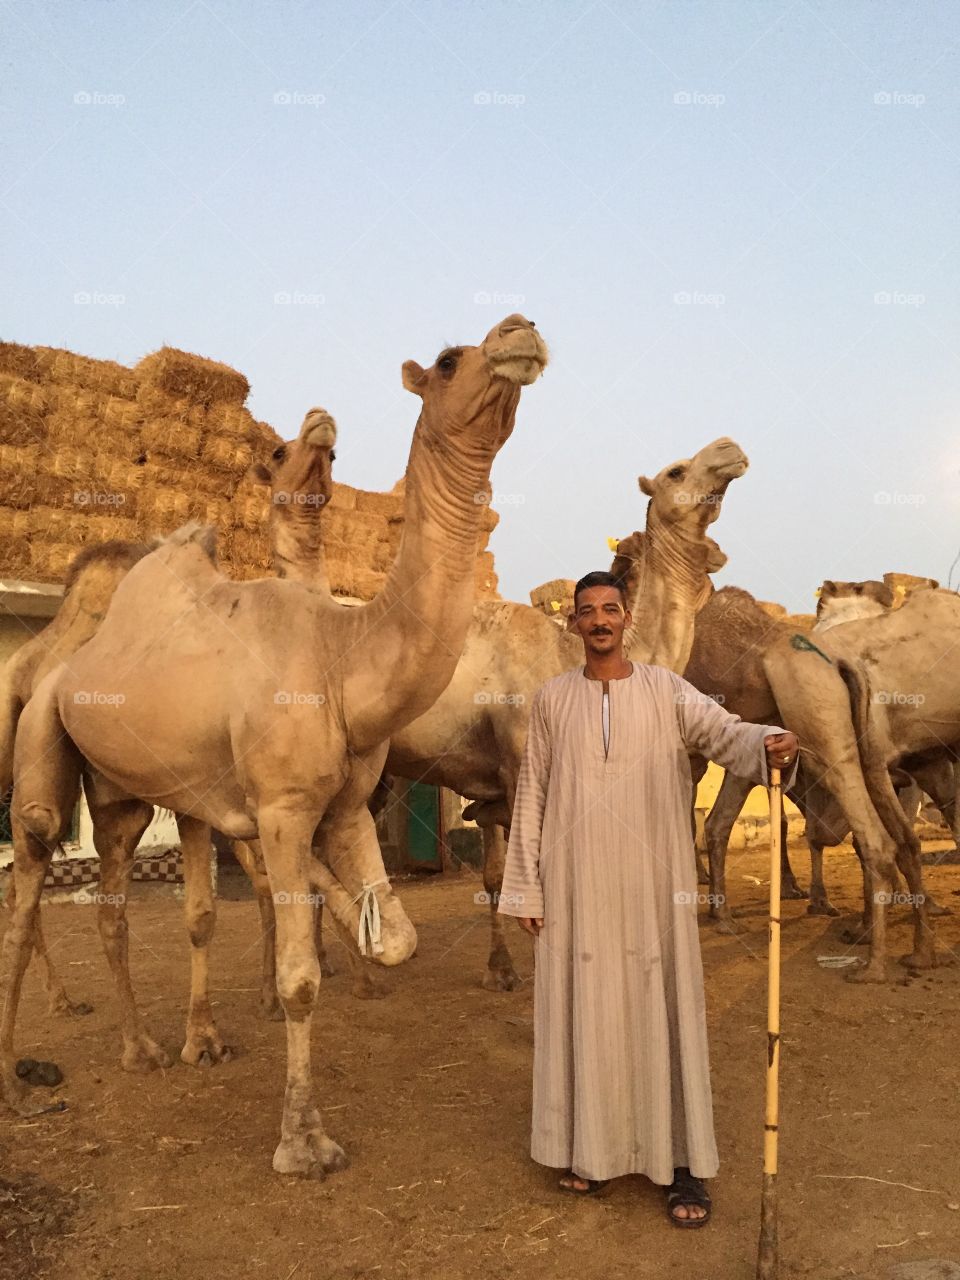 Camel’s trade in Egypt 🇪🇬